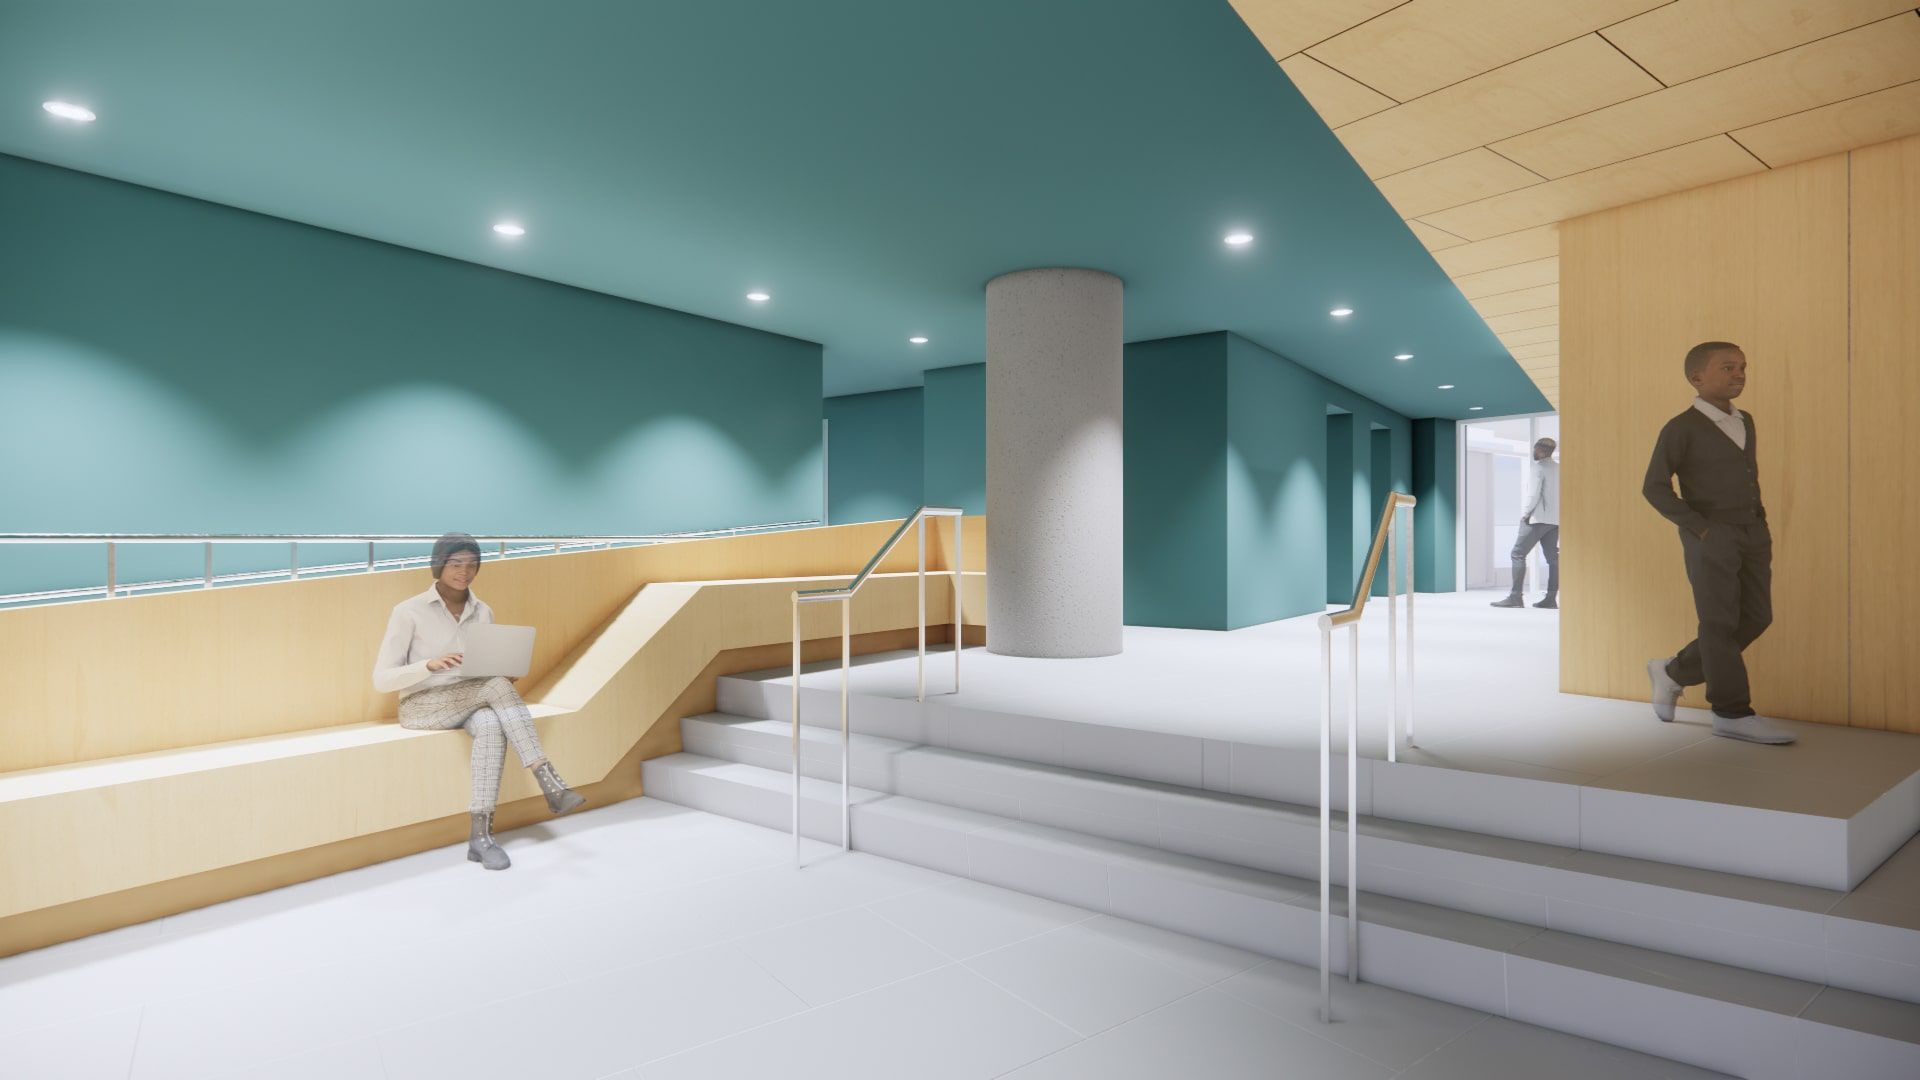 View of lobby with integrated seating and sculptural main stair at right